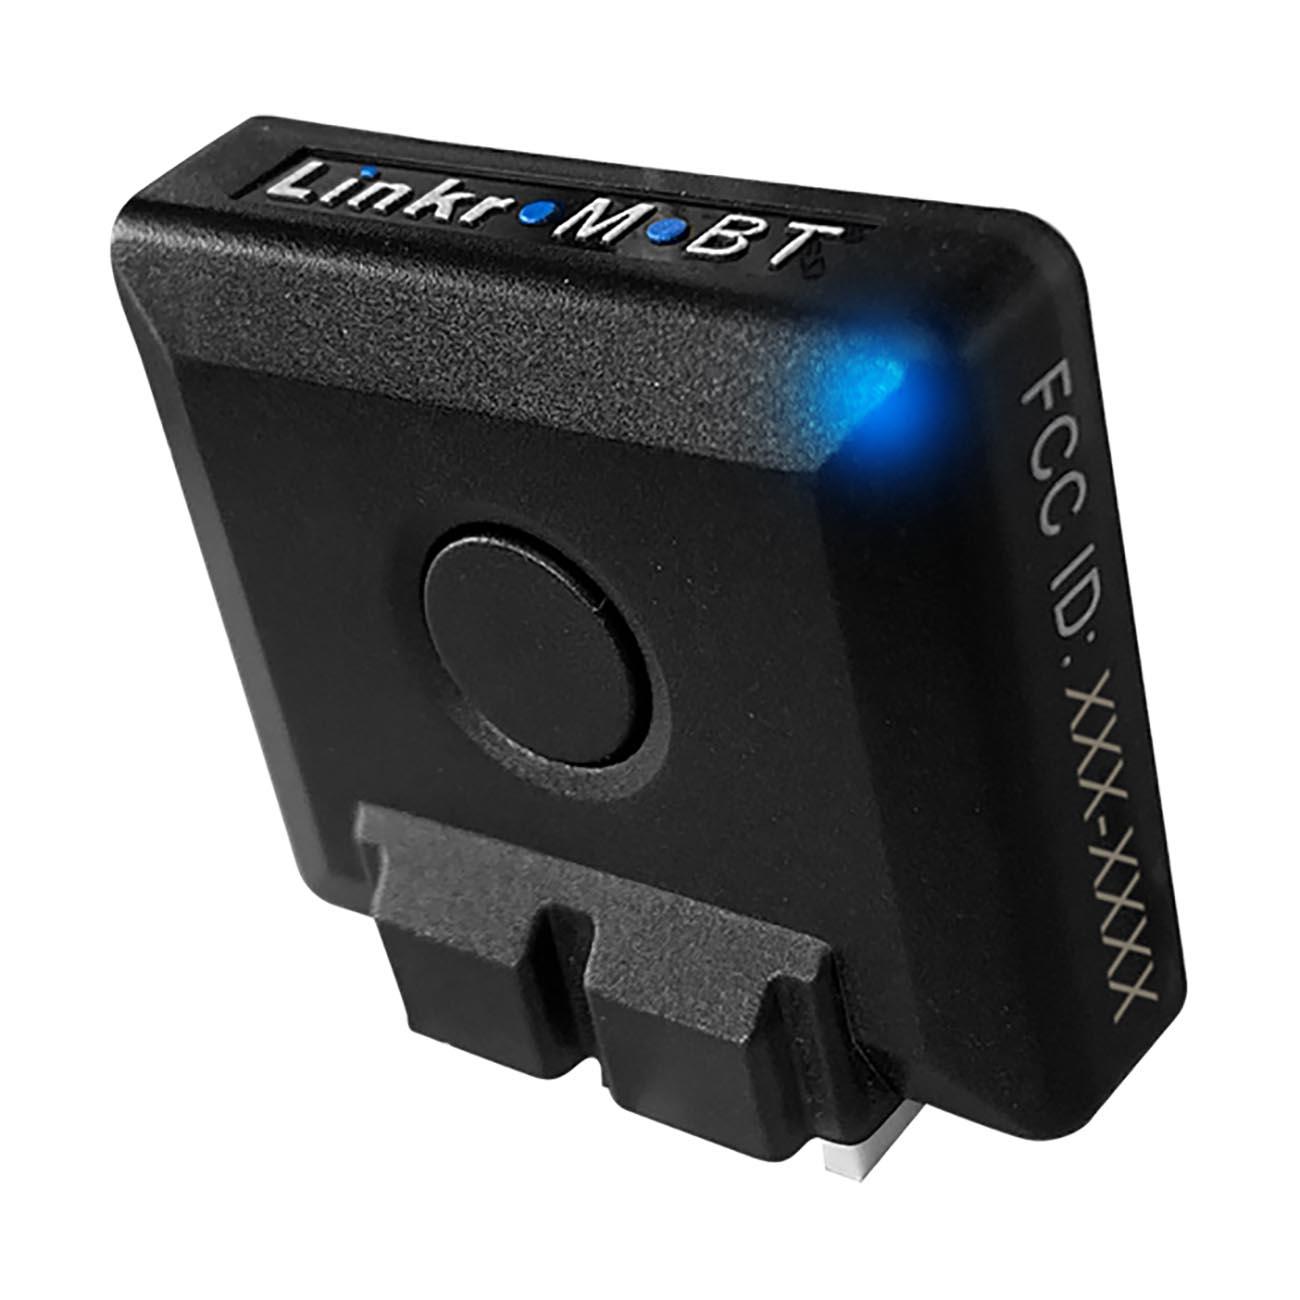 LINKRMBT Omega - Bluetooth Dongle with APP - Compatible with Excalibur 70 Series Units